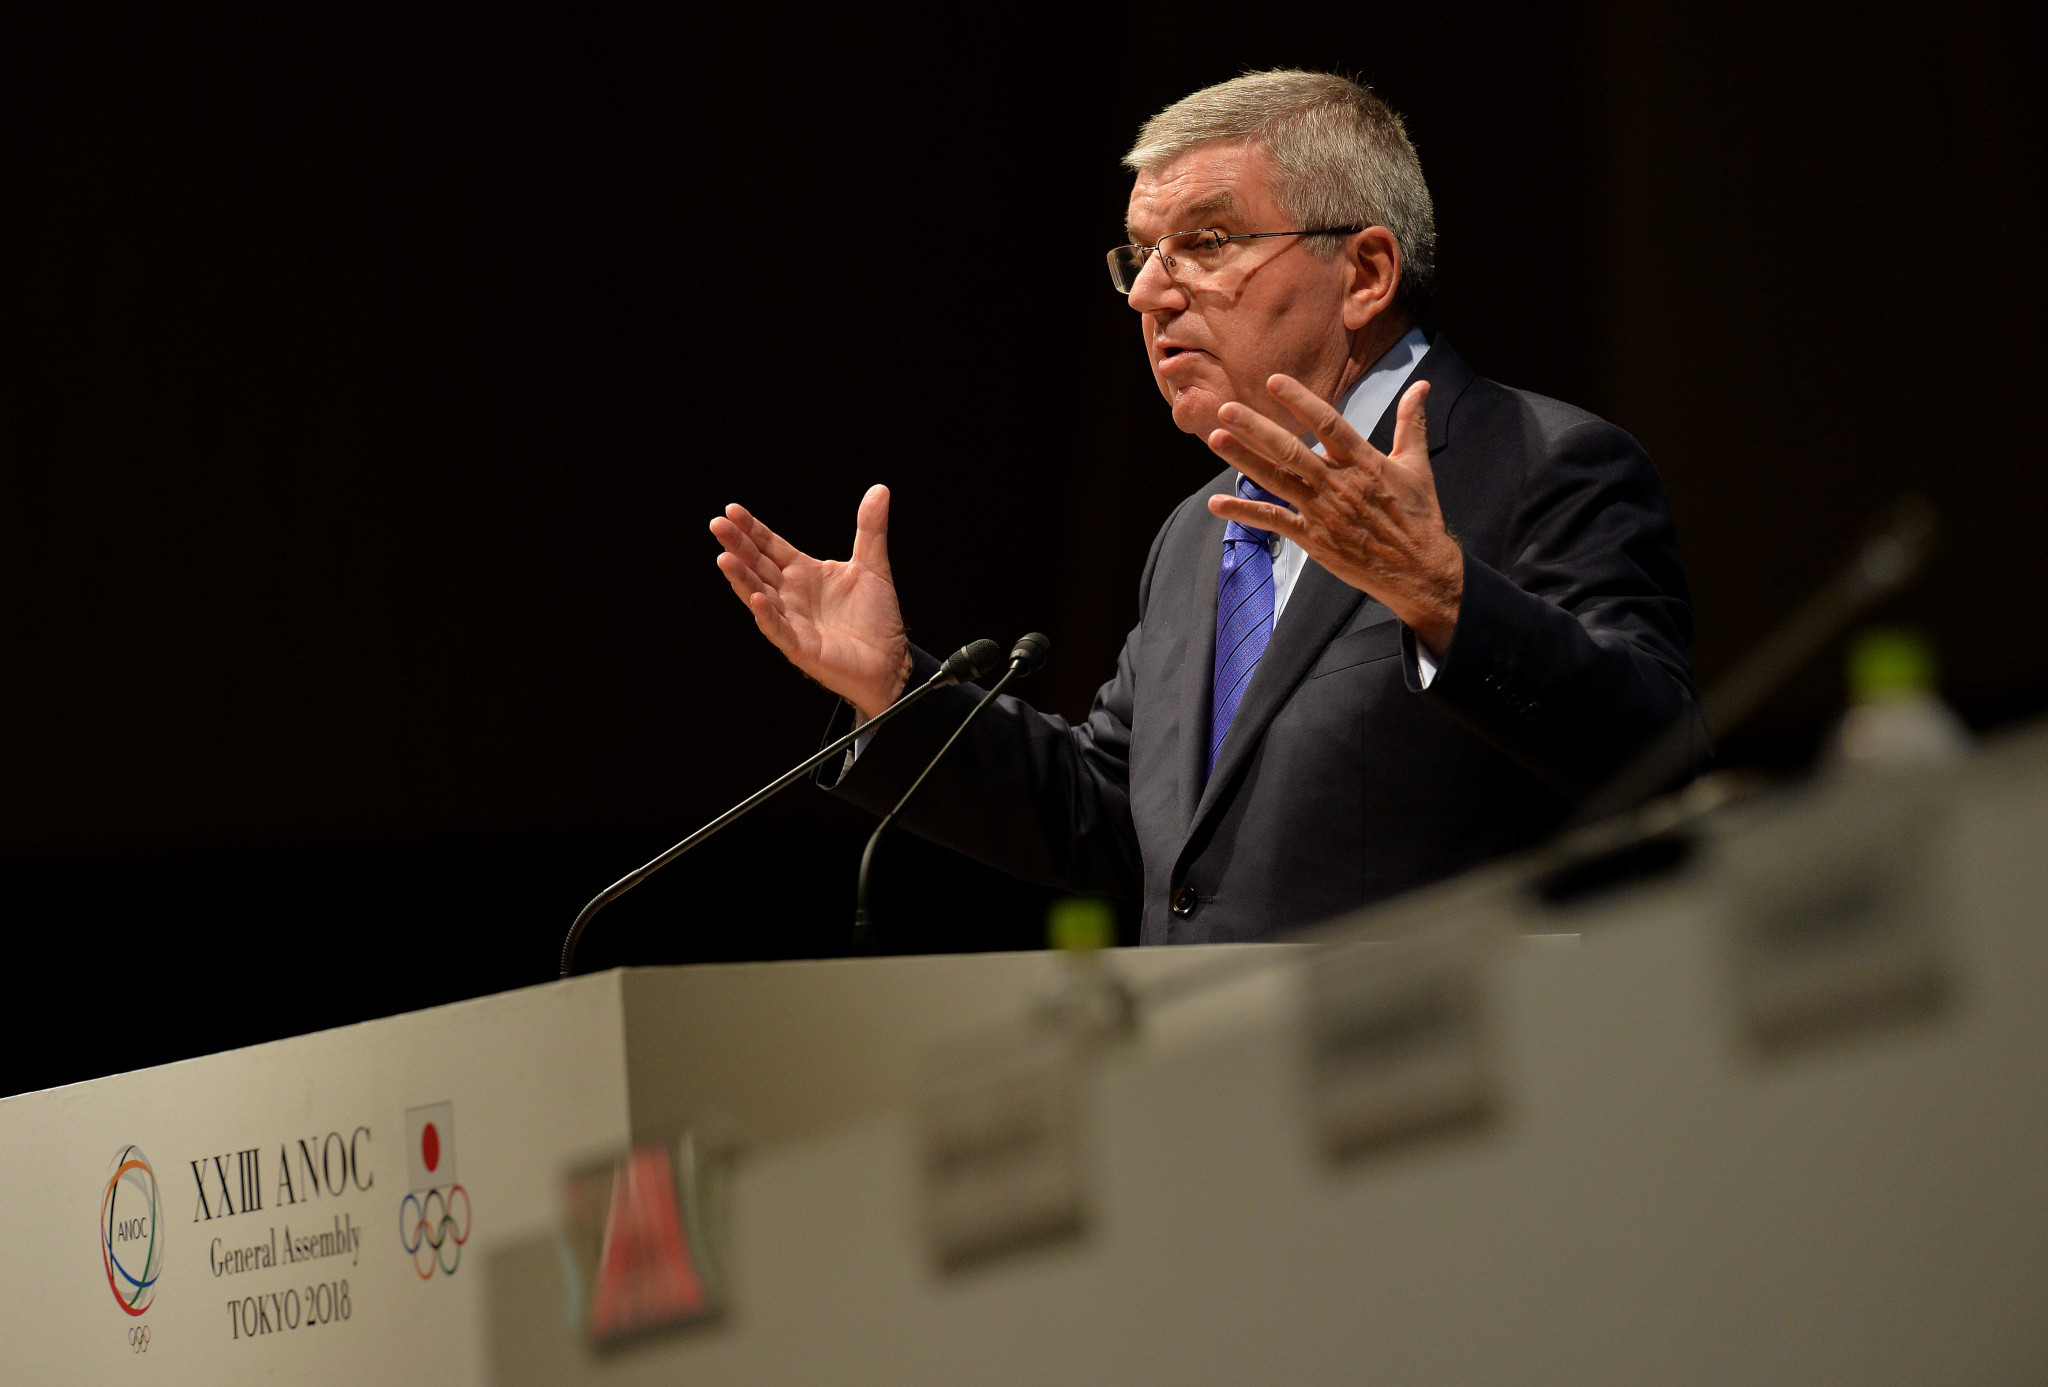 IOC President Thomas Bach launched an impassioned defence of his organisation's Athletes' Commission ©Getty Images